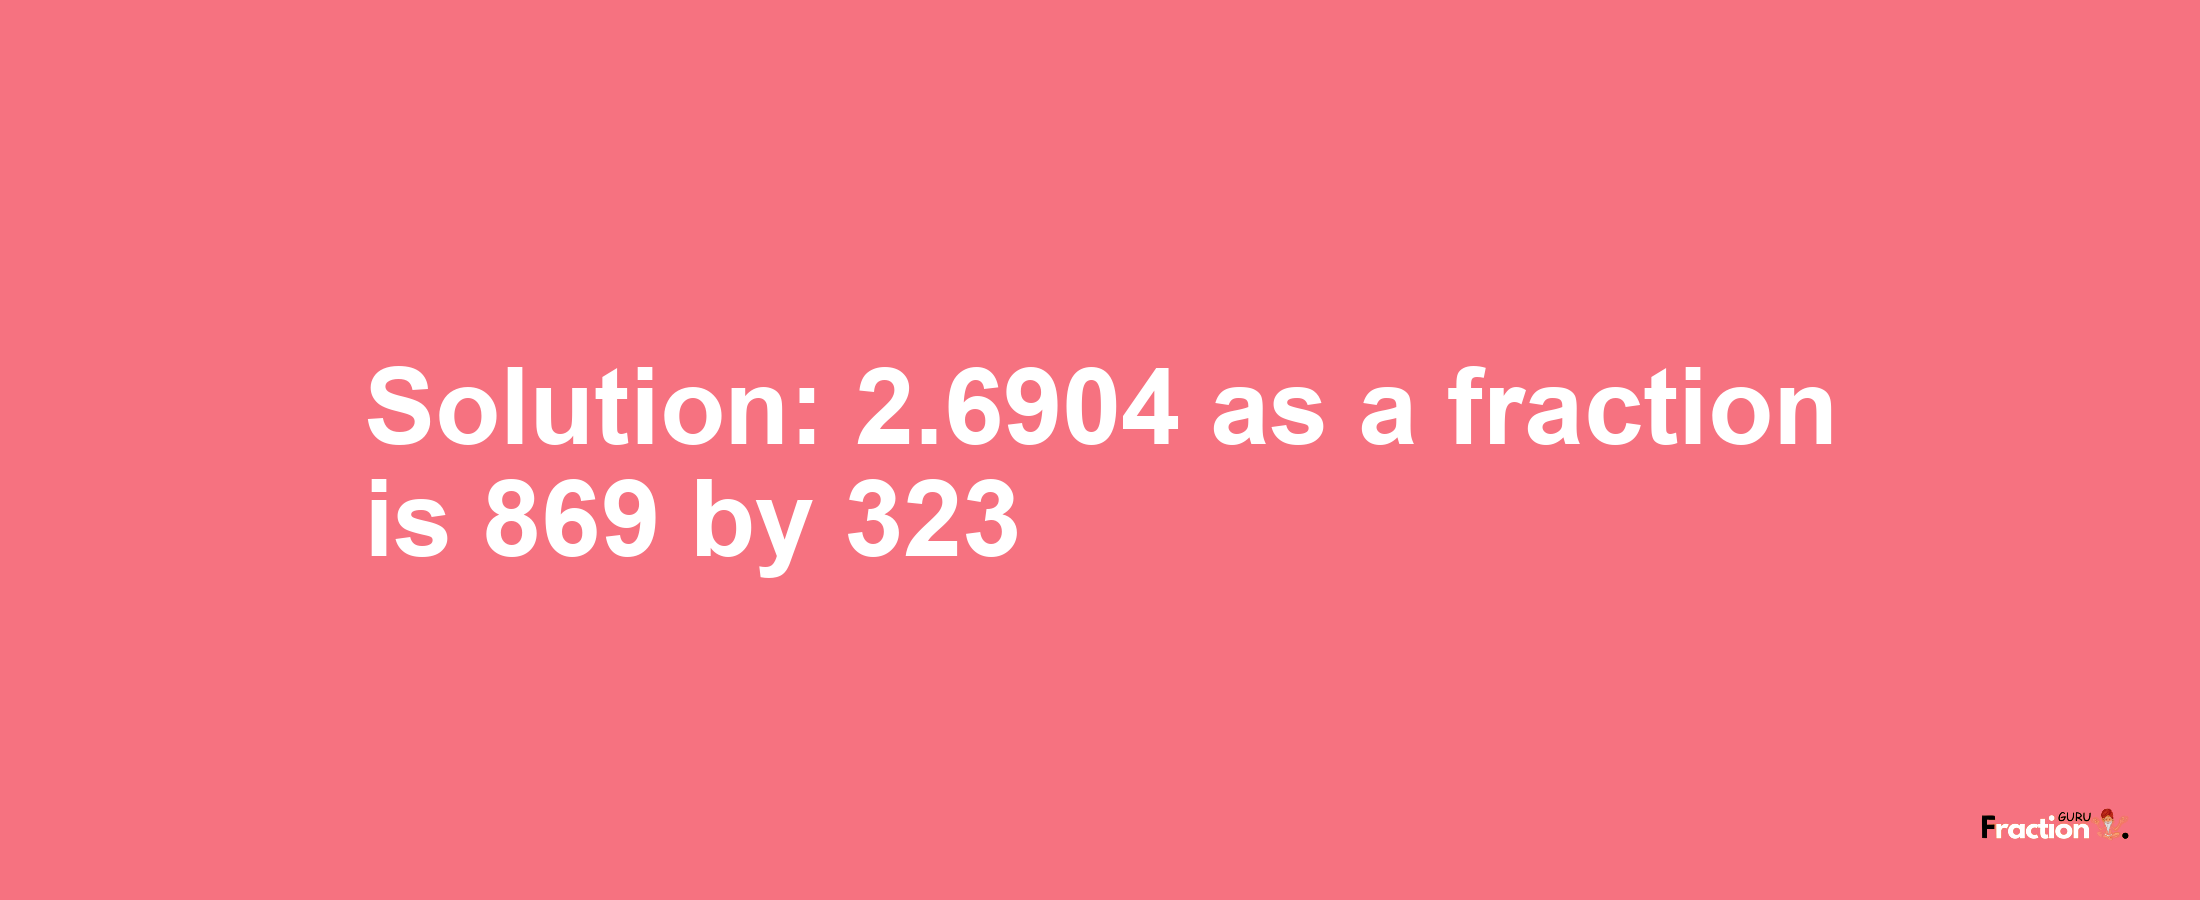 Solution:2.6904 as a fraction is 869/323